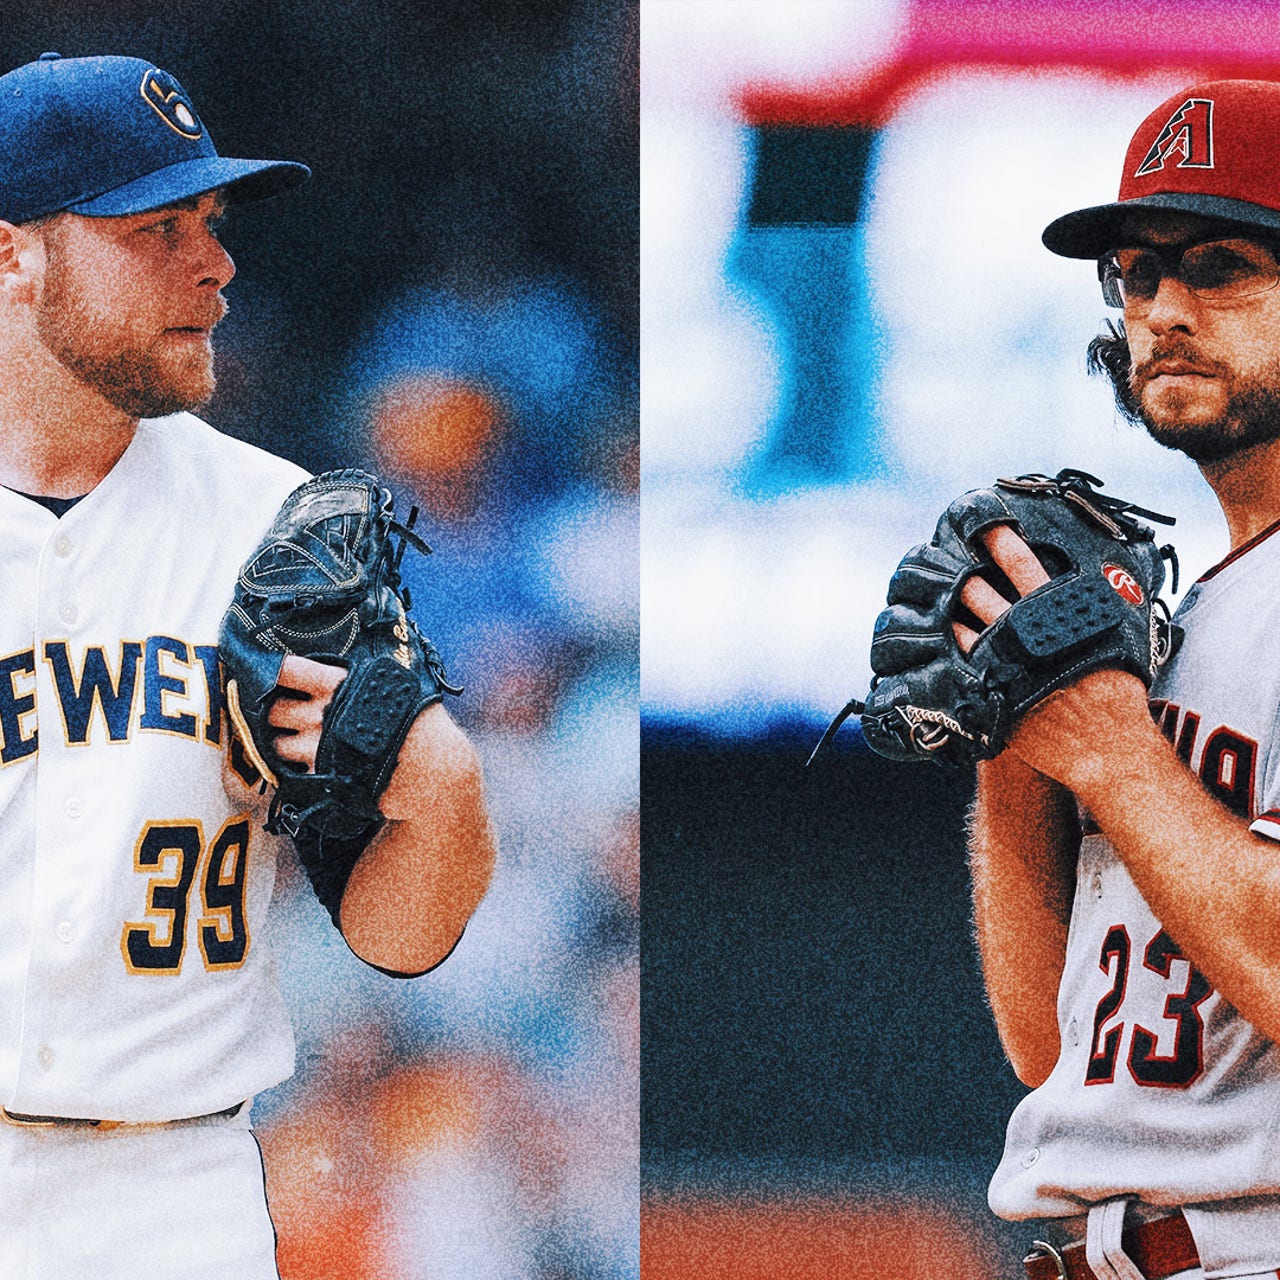 Milwaukee Brewers, Los Angeles Dodgers announce NLCS Game 3 lineups